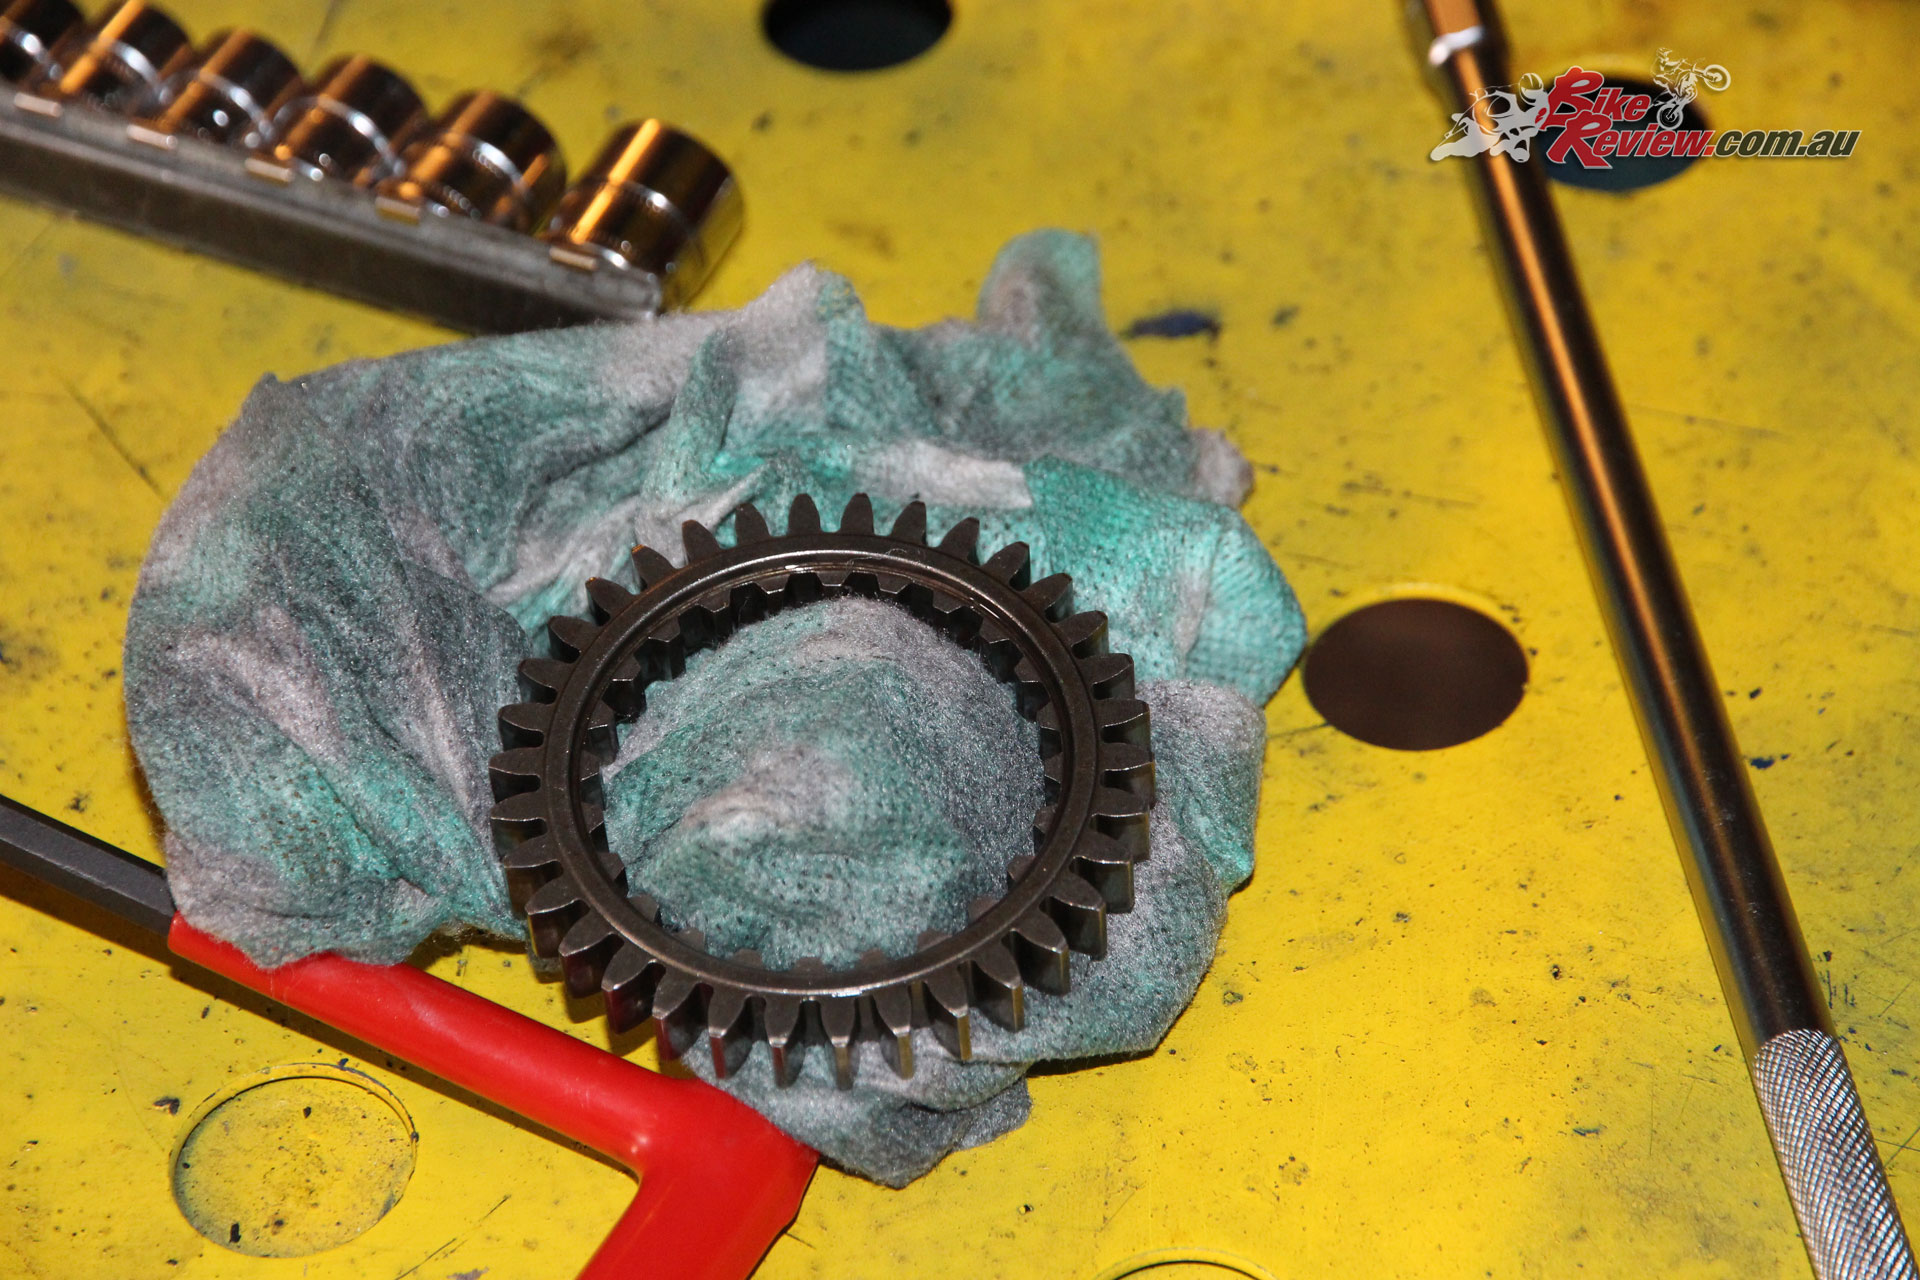 Oil pump drive gear. Make sure you’ve got it facing the right way.